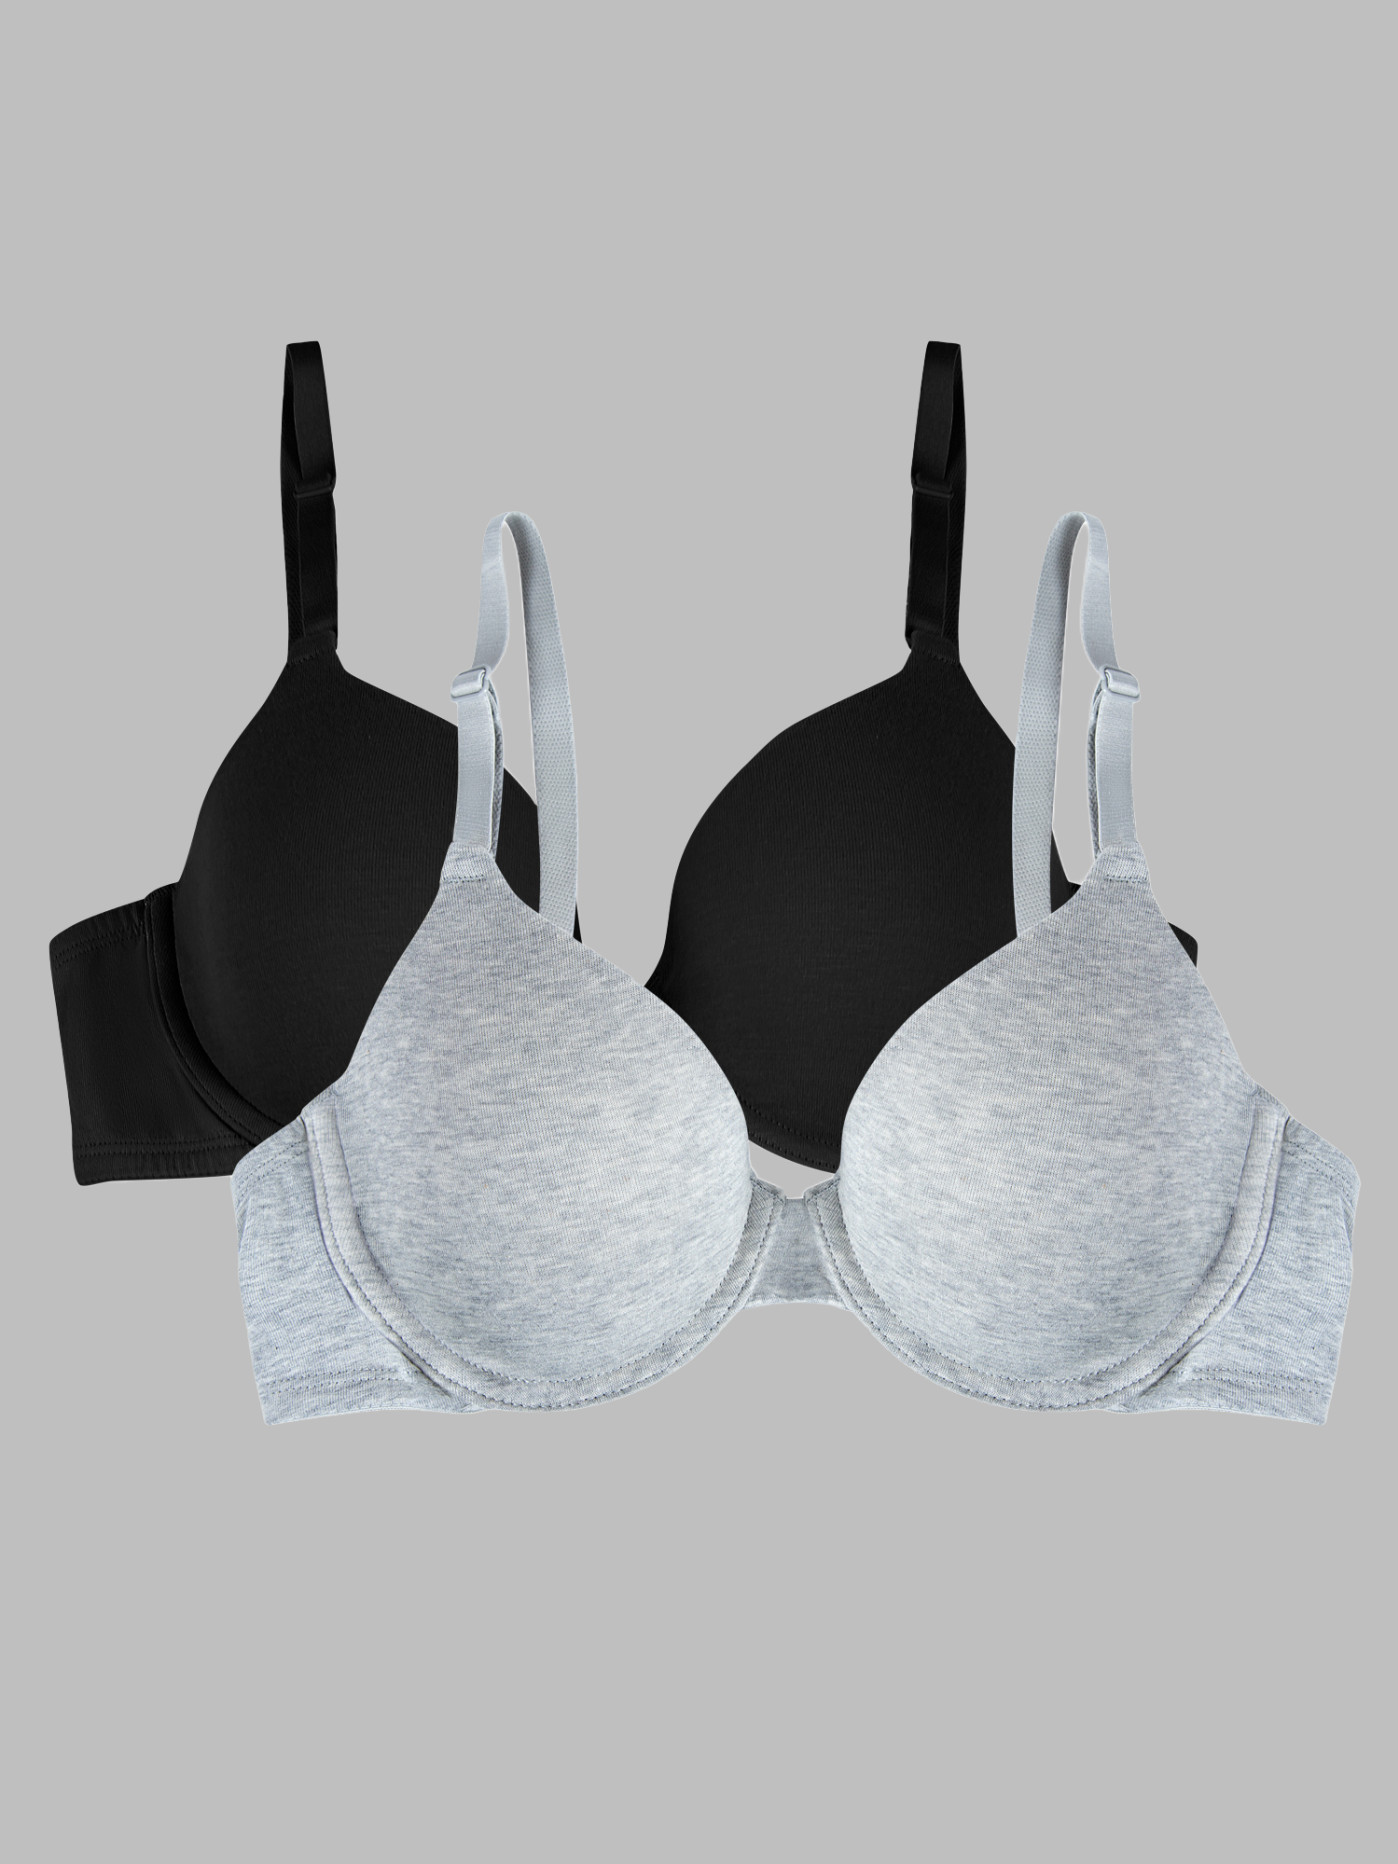 Women Bras 6 pack of T-shirt Bra B cup C cup D cup DD cup DDD cup